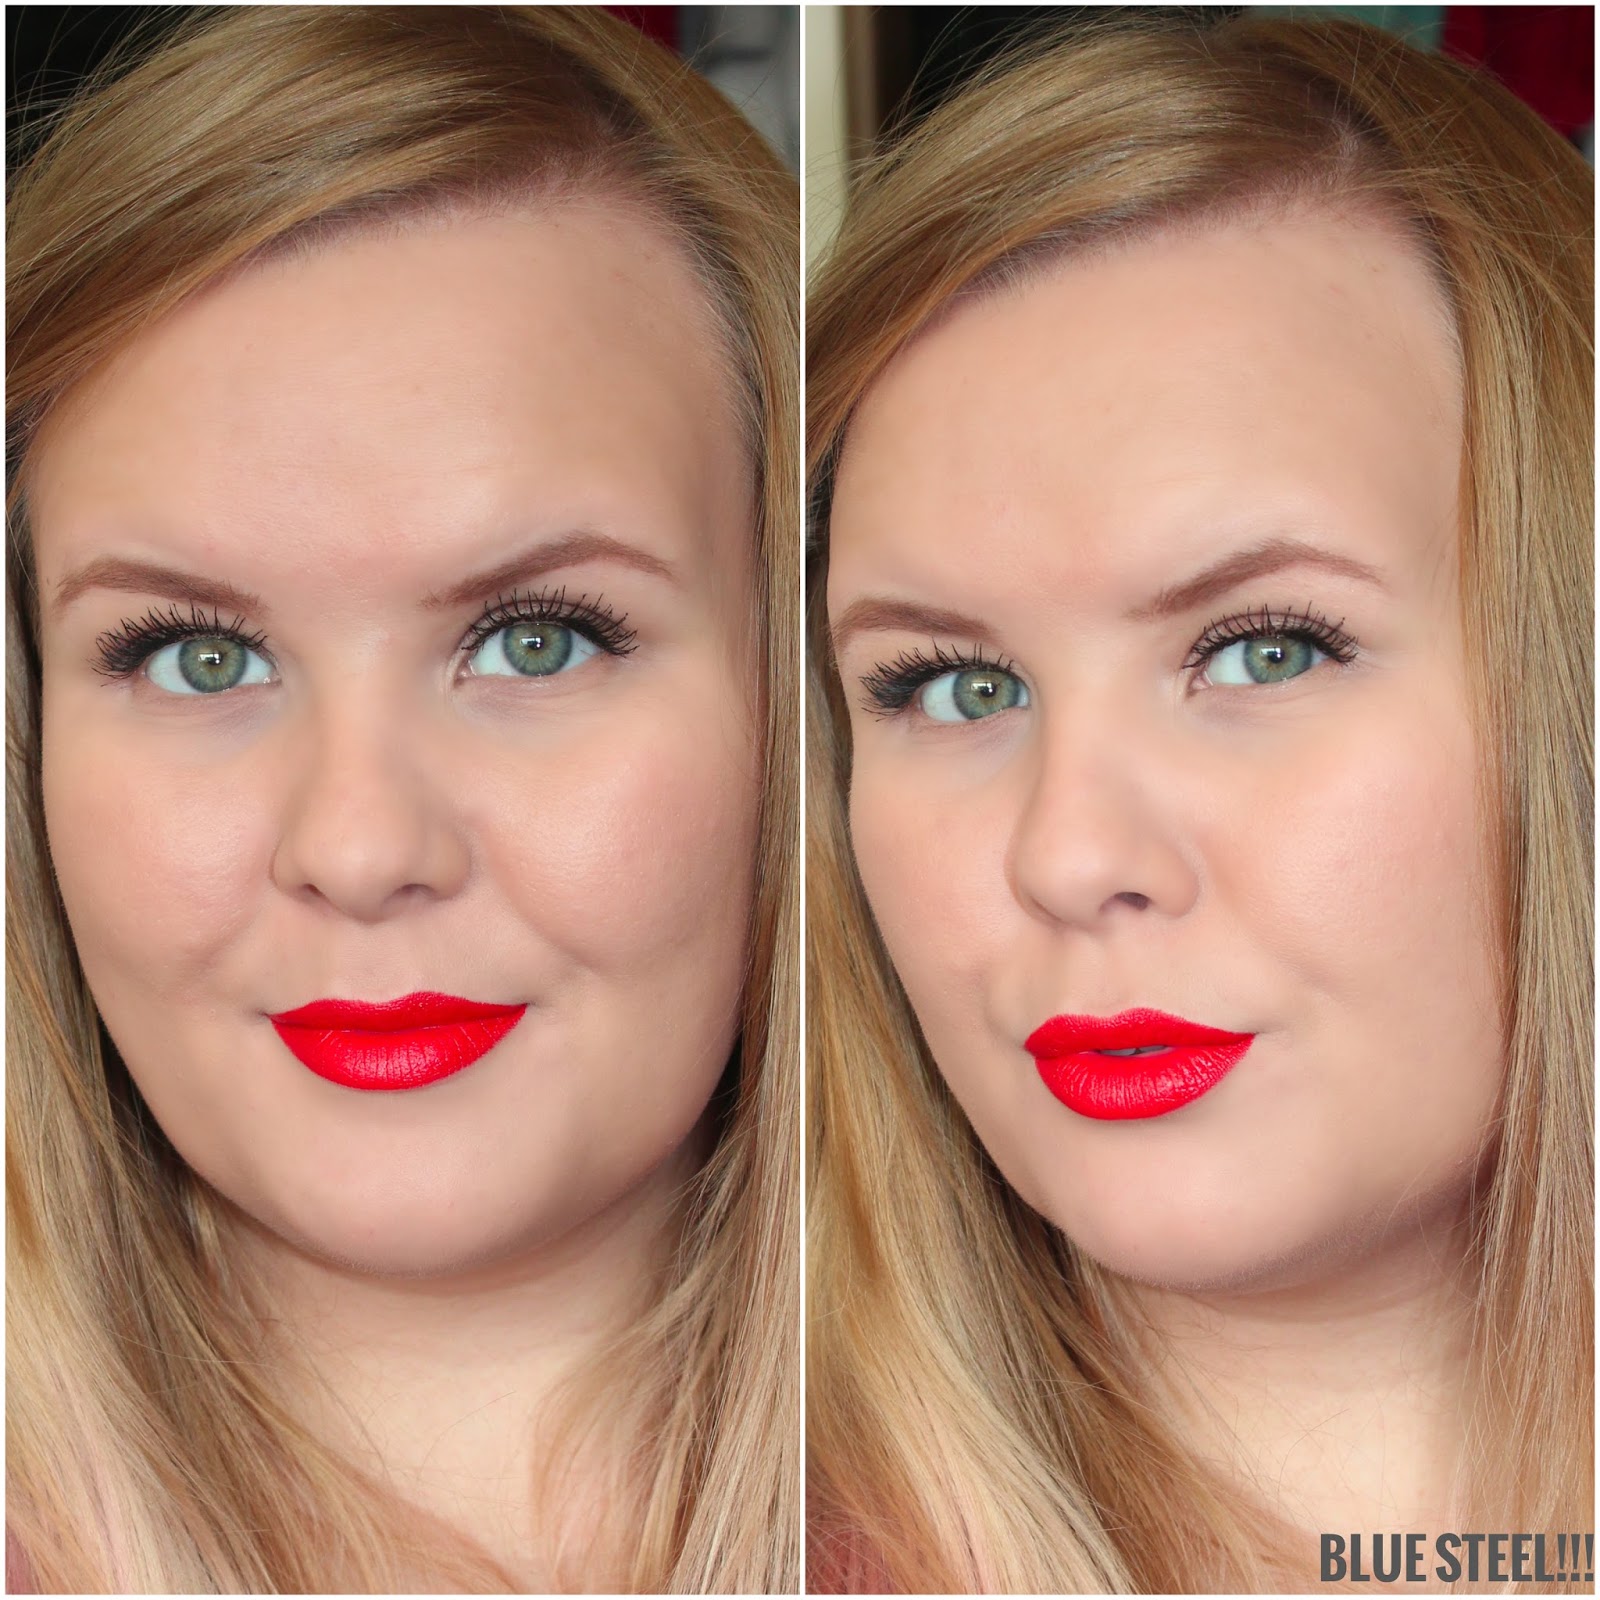 Review Mac Lady Danger Lipstick Obsessed By Beauty